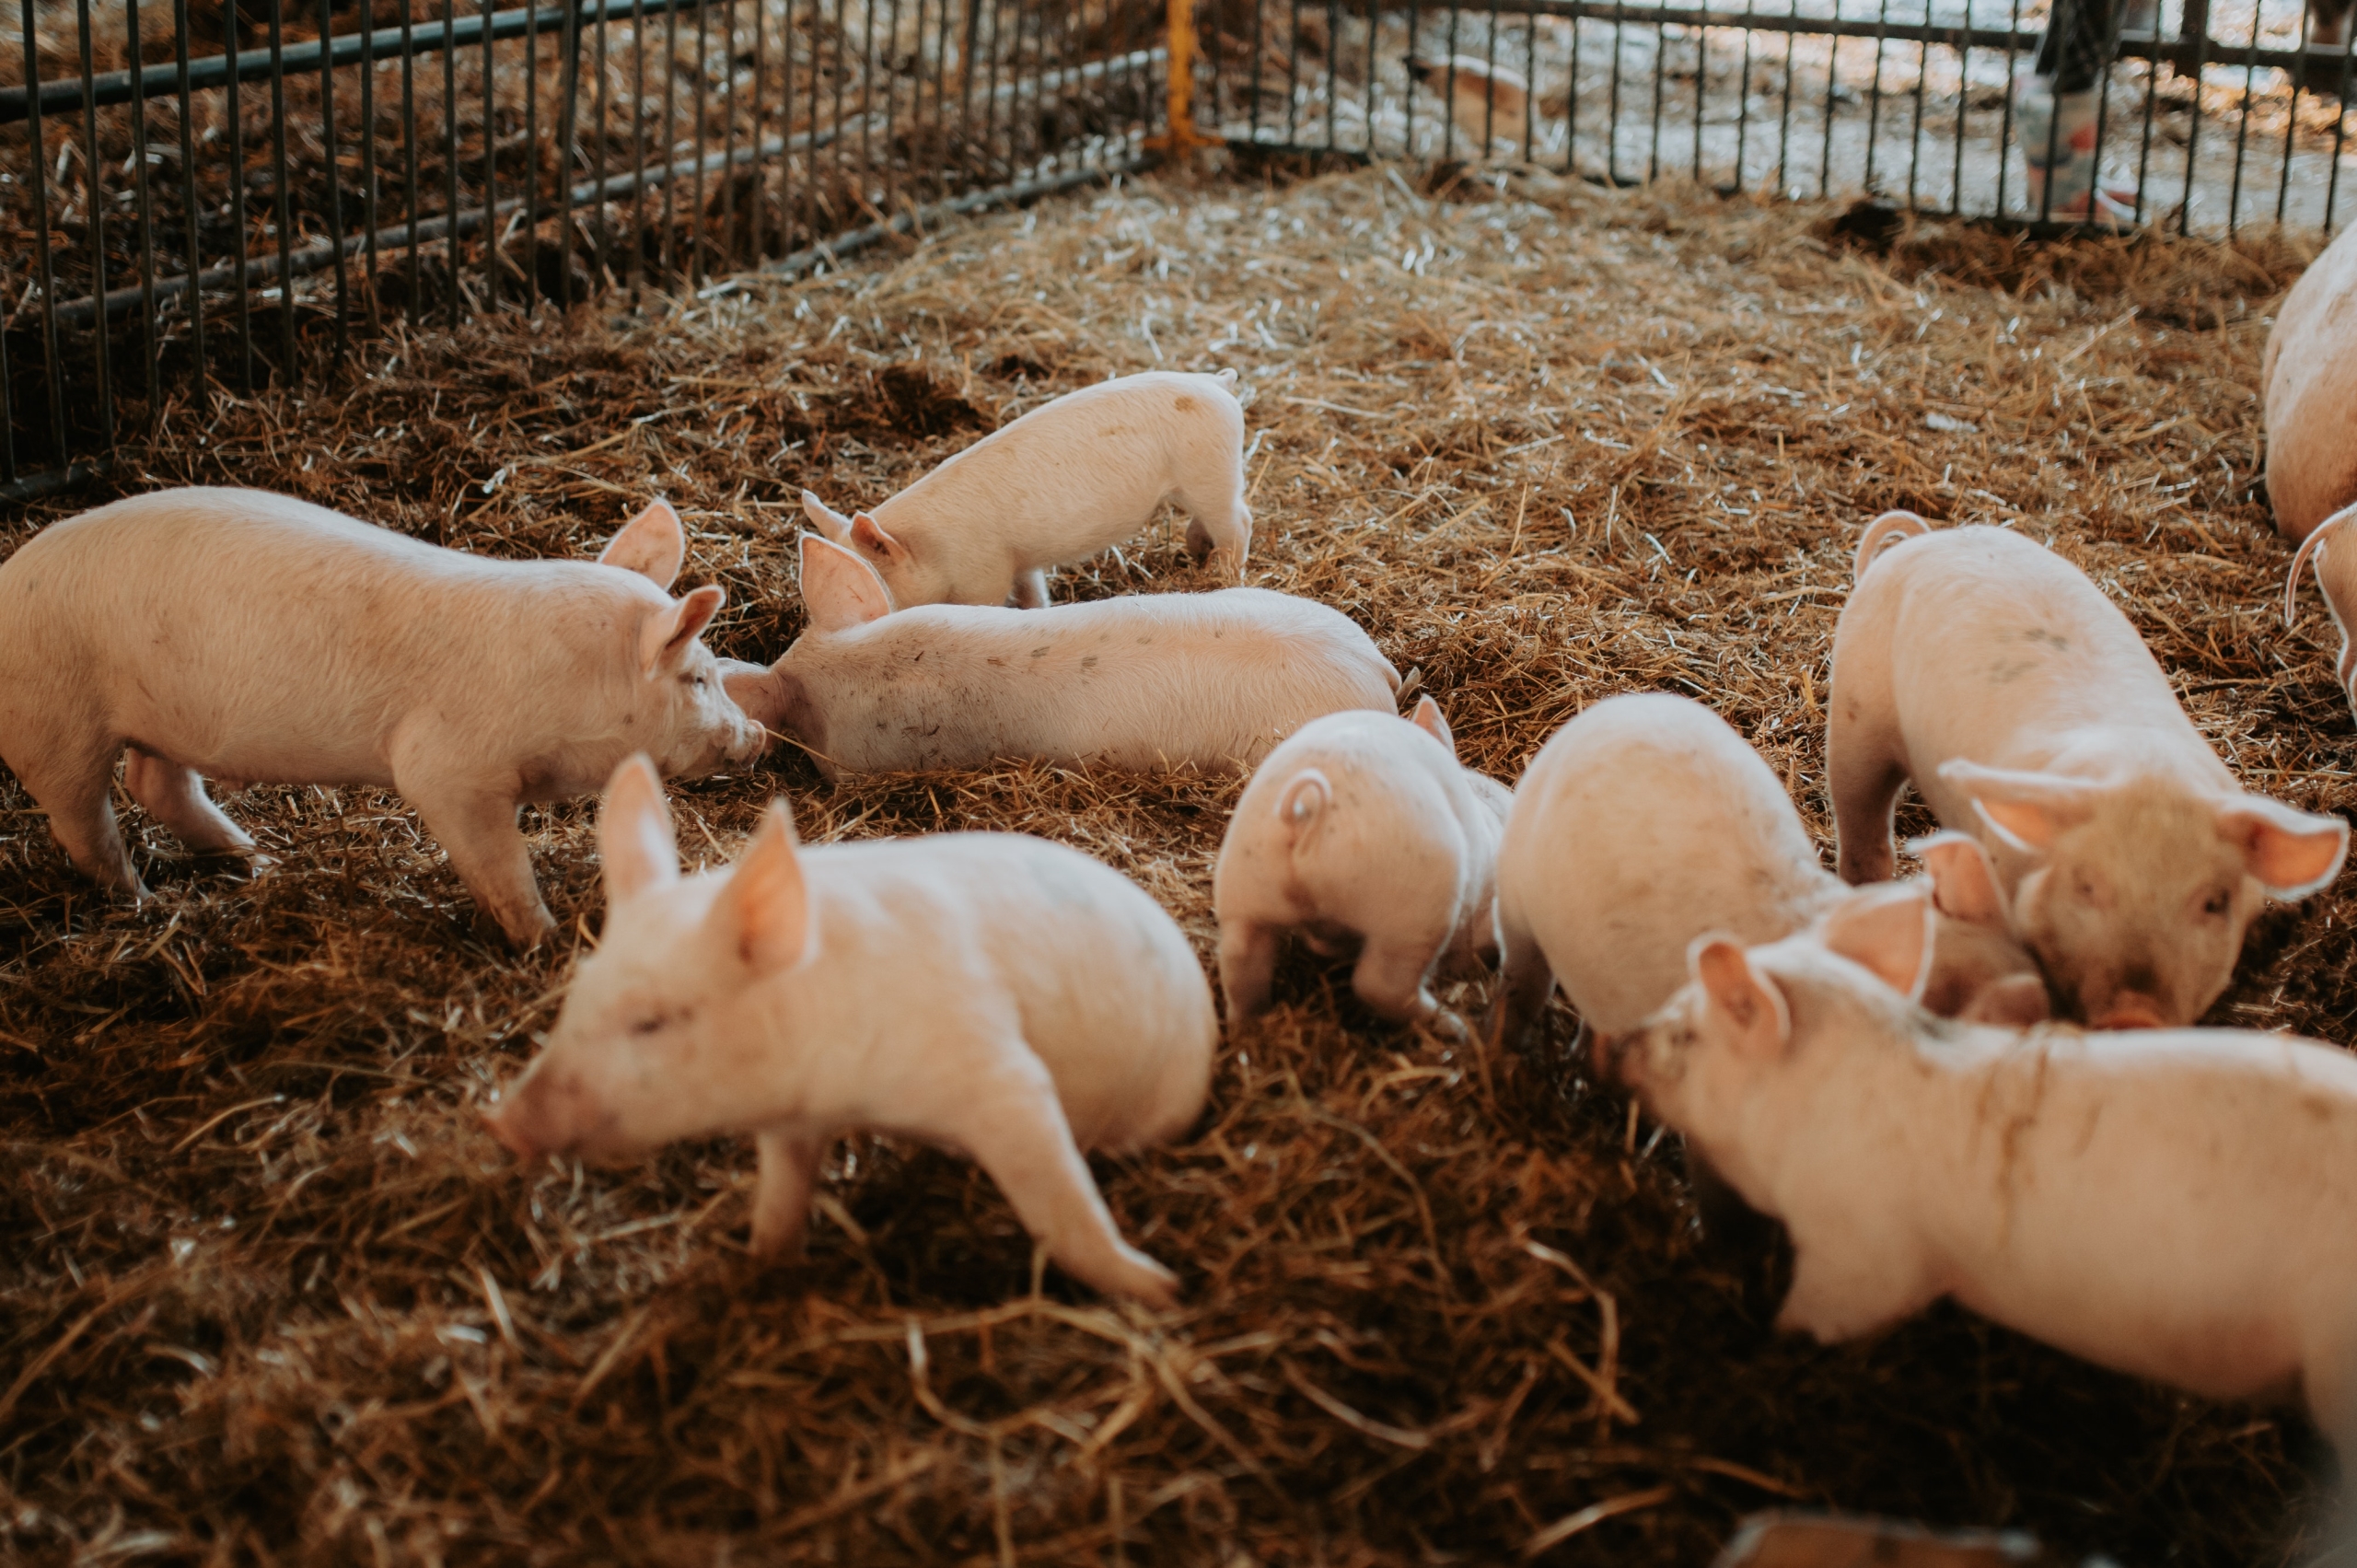 Group of pigs in a pen